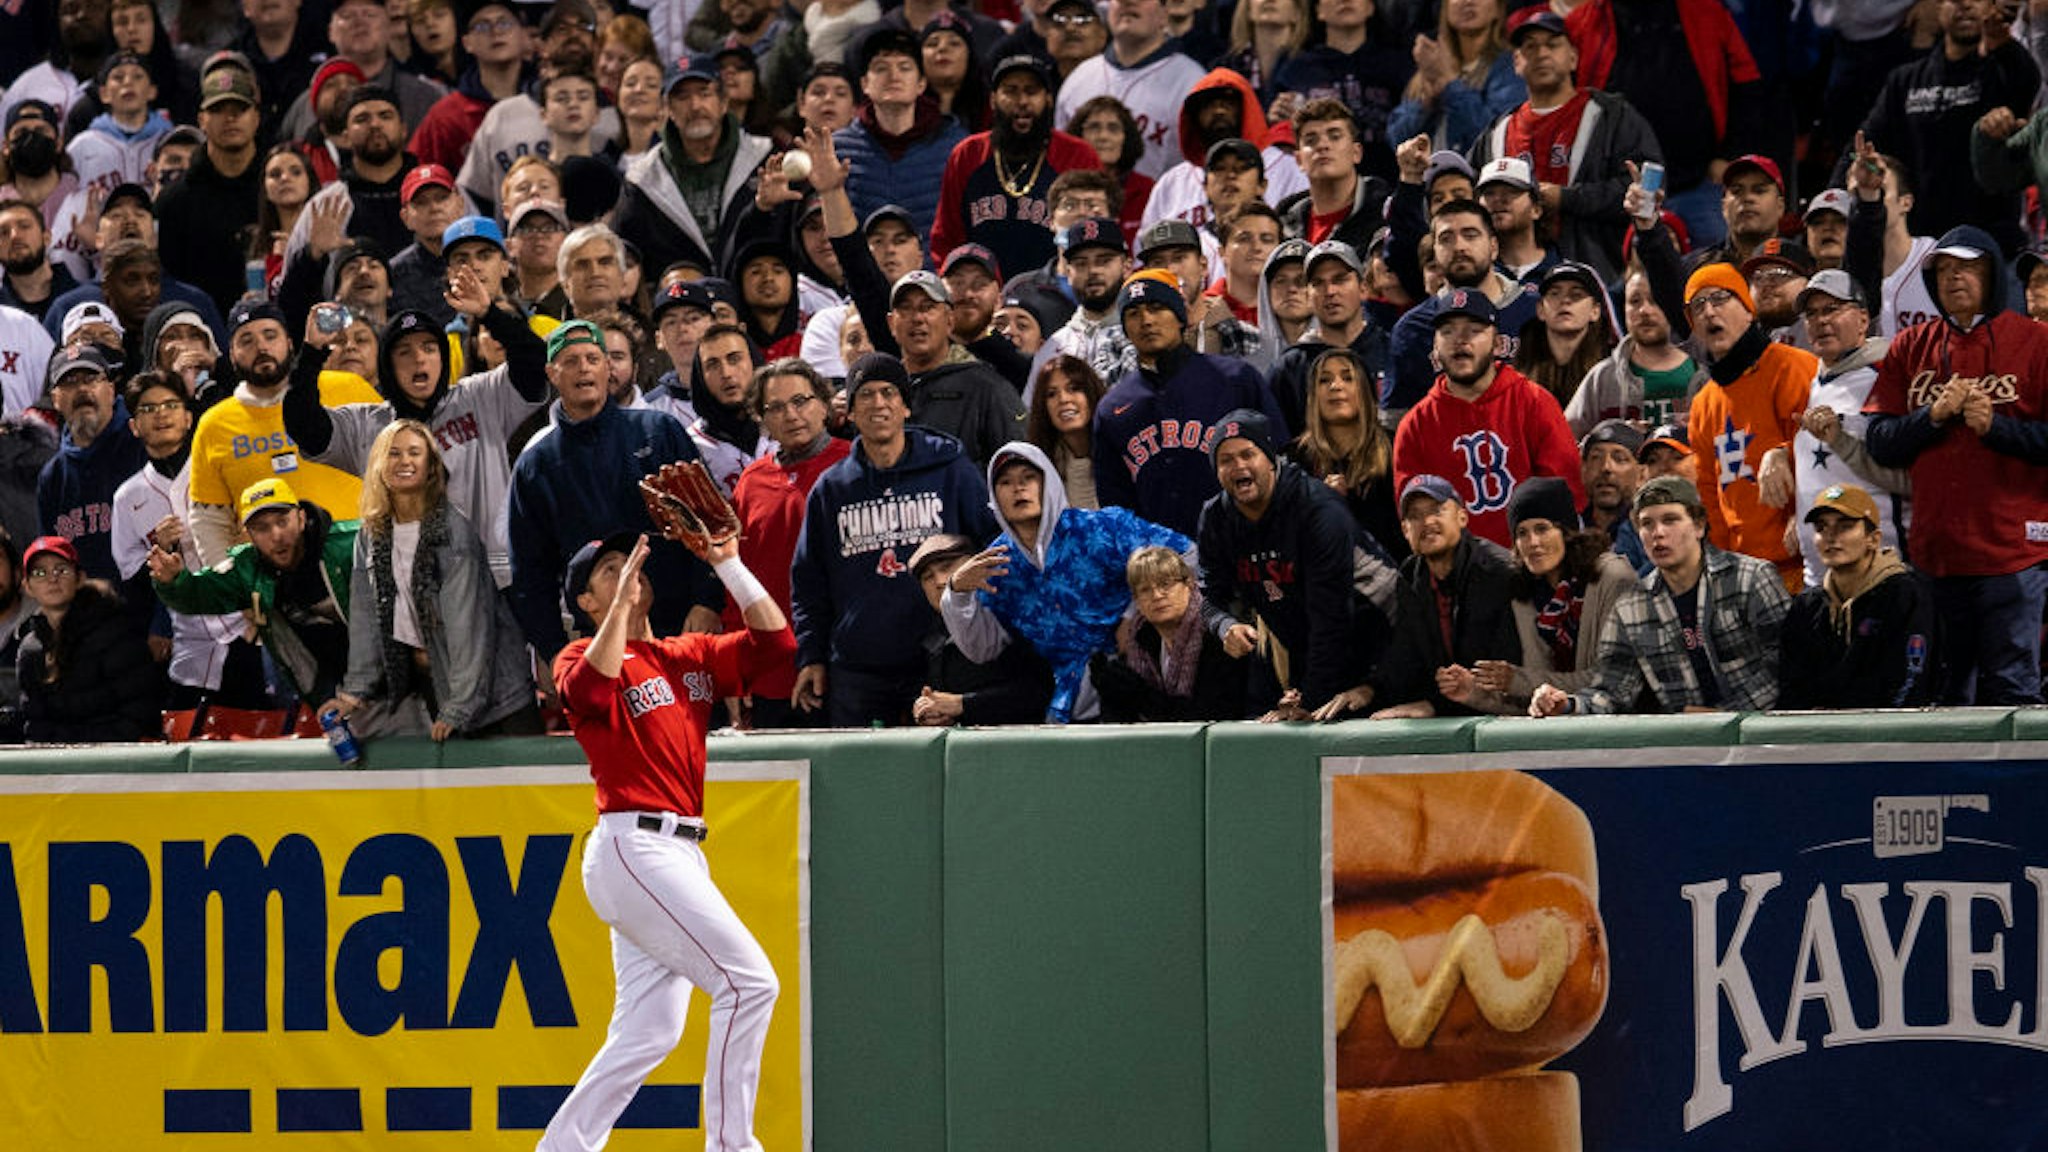 Hunter Renfroe #10 of the Boston Red Sox catches a line drive during the fifth inning of game four of the 2021 American League Championship Series against the Houston Astros at Fenway Park on October 19, 2021 in Boston, Massachusetts.